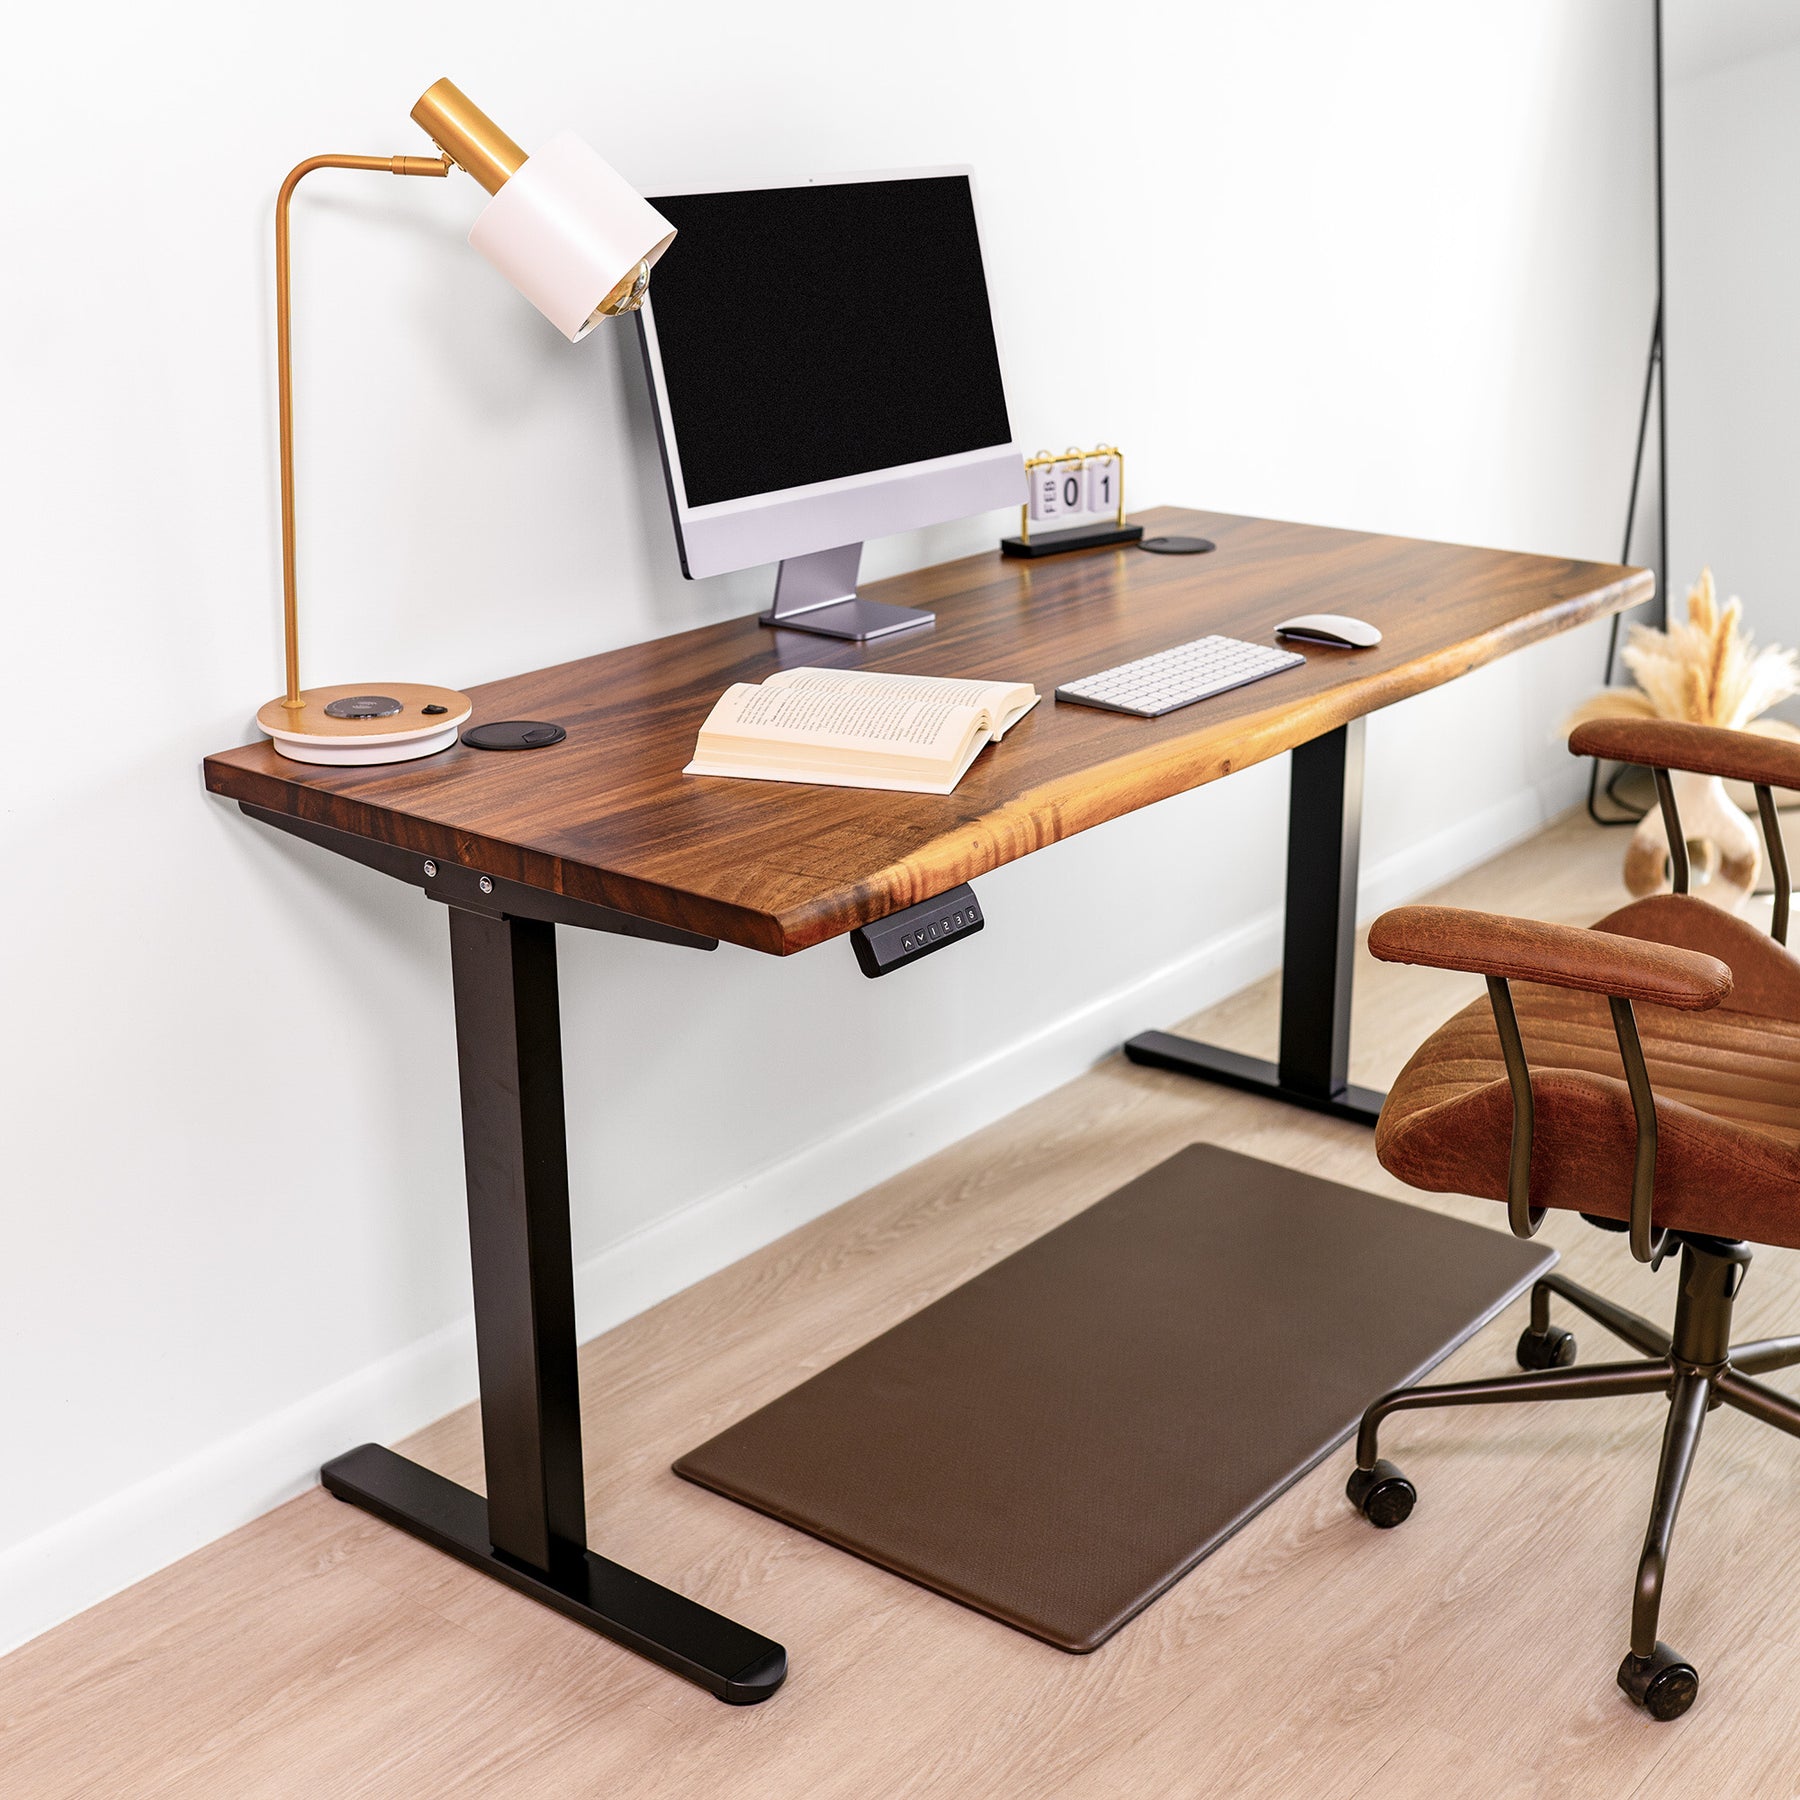 Walnut standing desk with natural live edge design, featuring rich walnut colors and adjustable height.